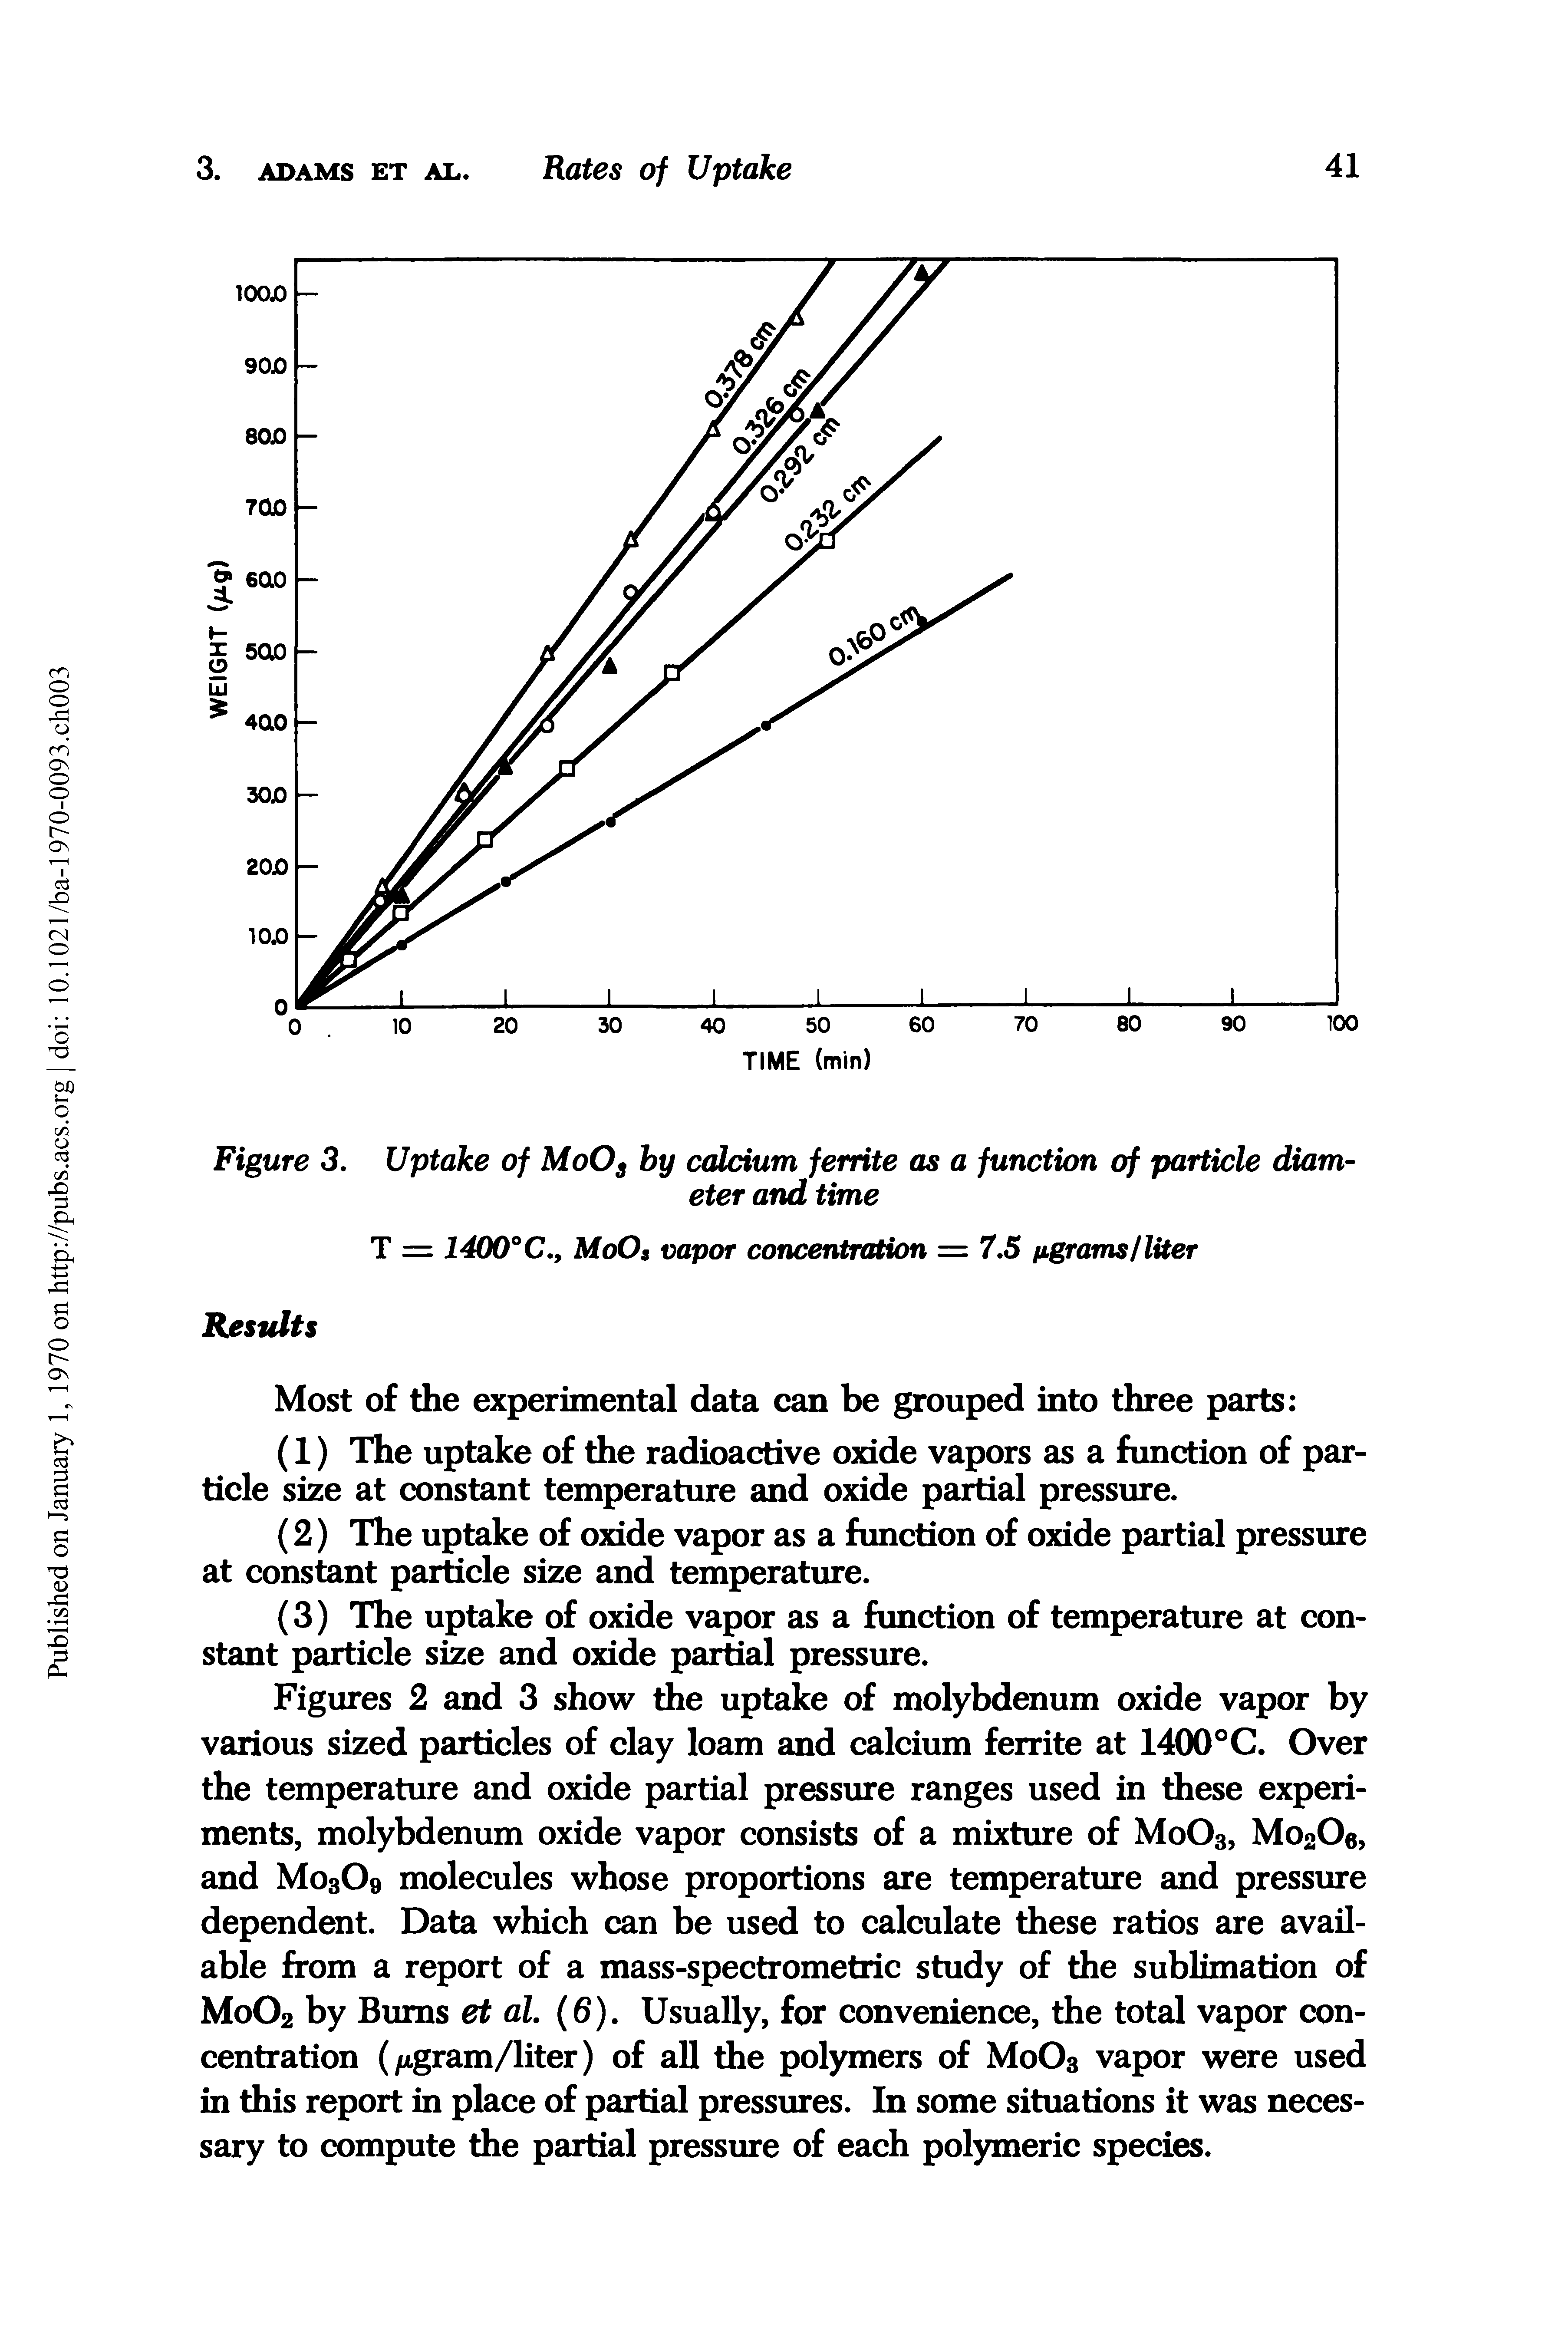 Figure 3. Uptake of MoOs by calcium ferrite as a function of particle diameter and time...